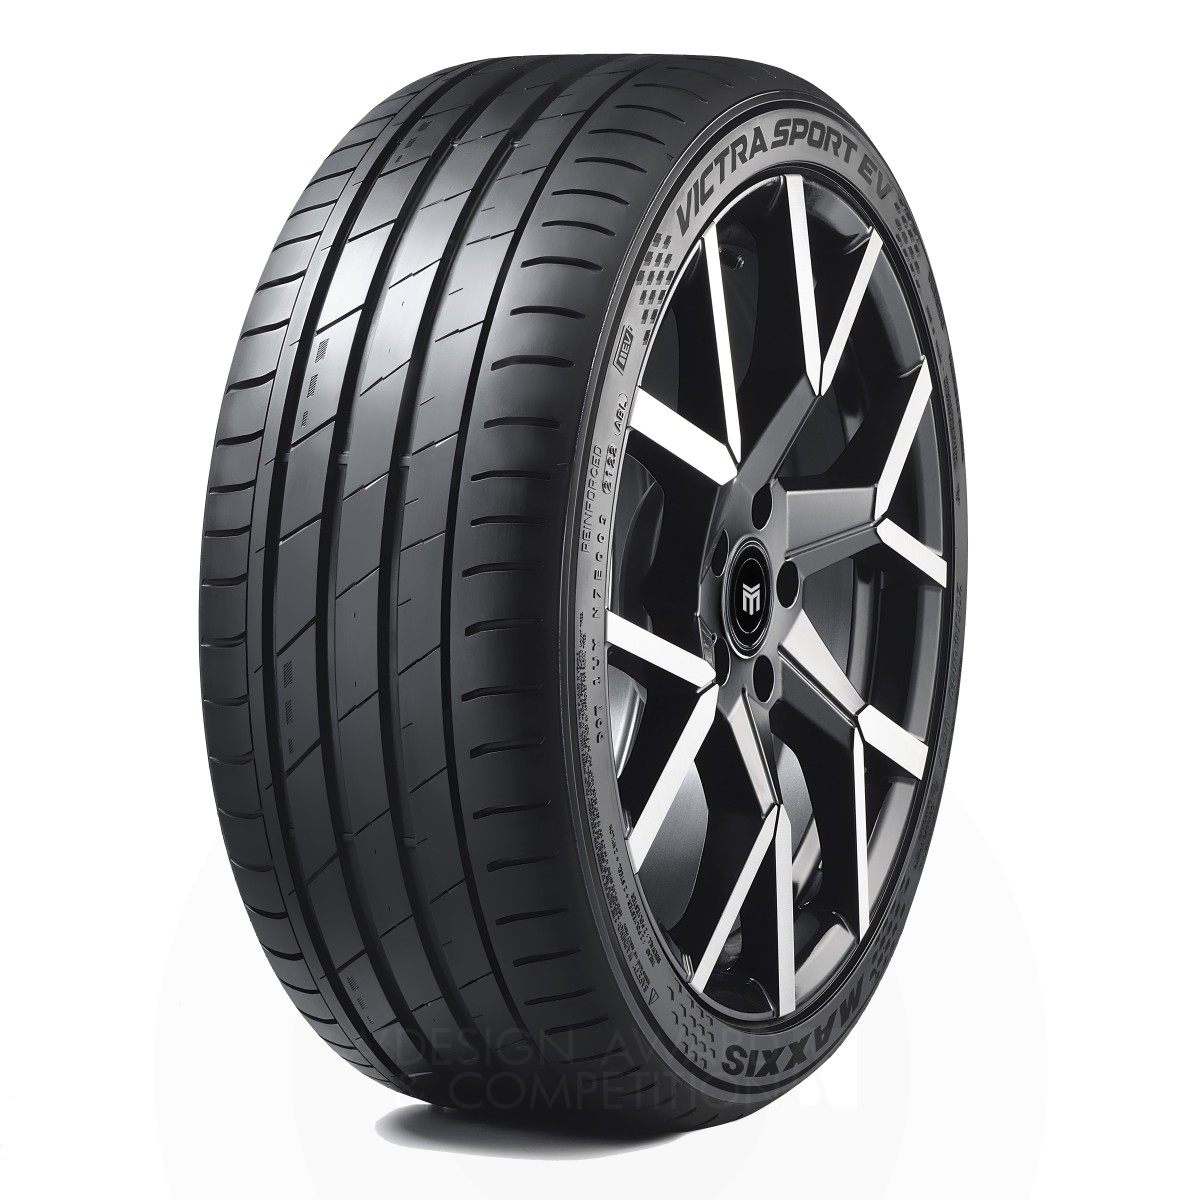 Victra Sport EV Tire by Maxxis International and Cheng Shin Rubber Ind